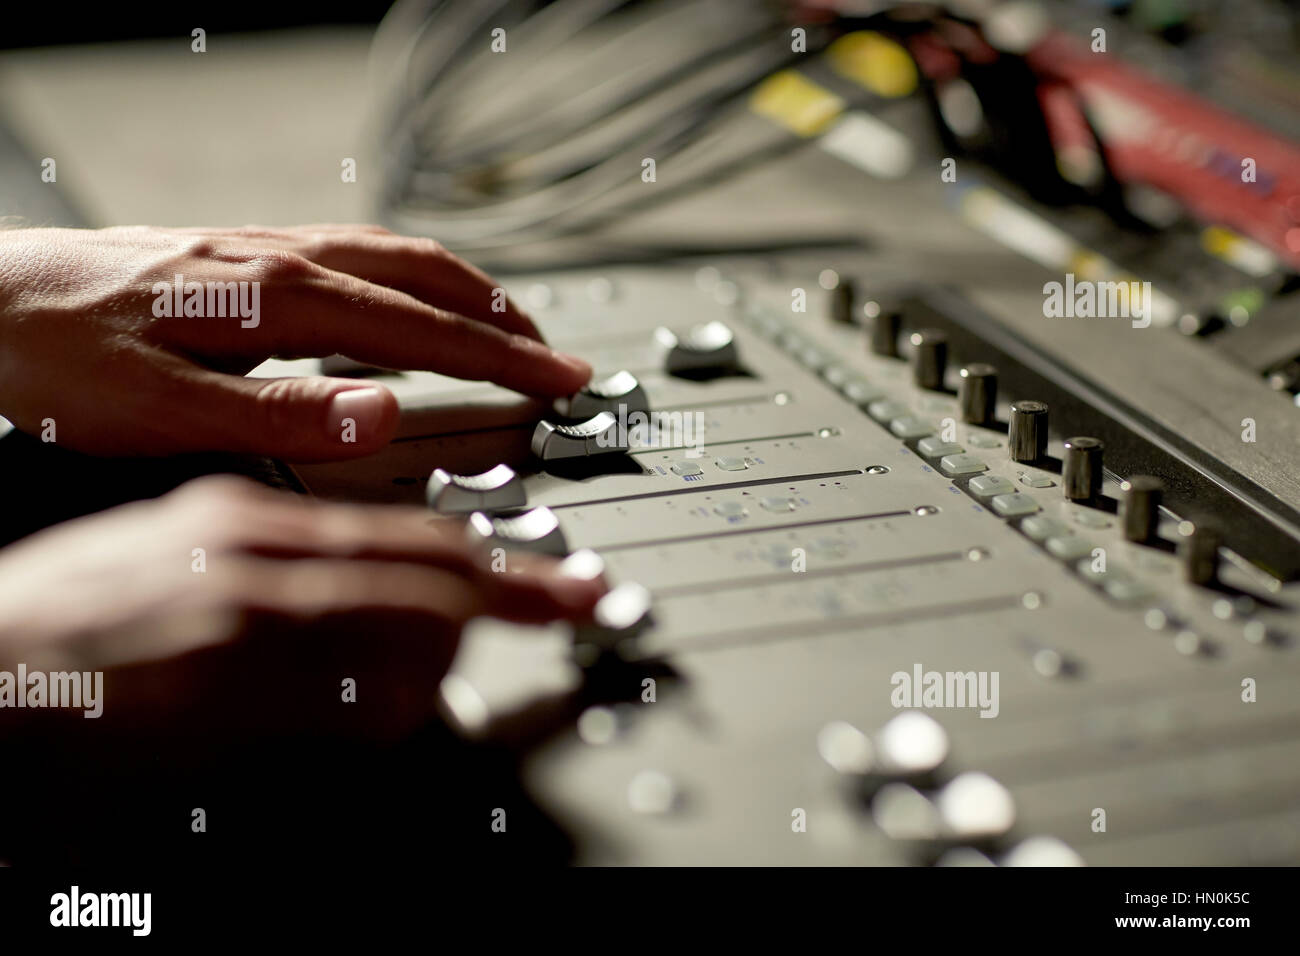 hands on mixing console in music recording studio Stock Photo